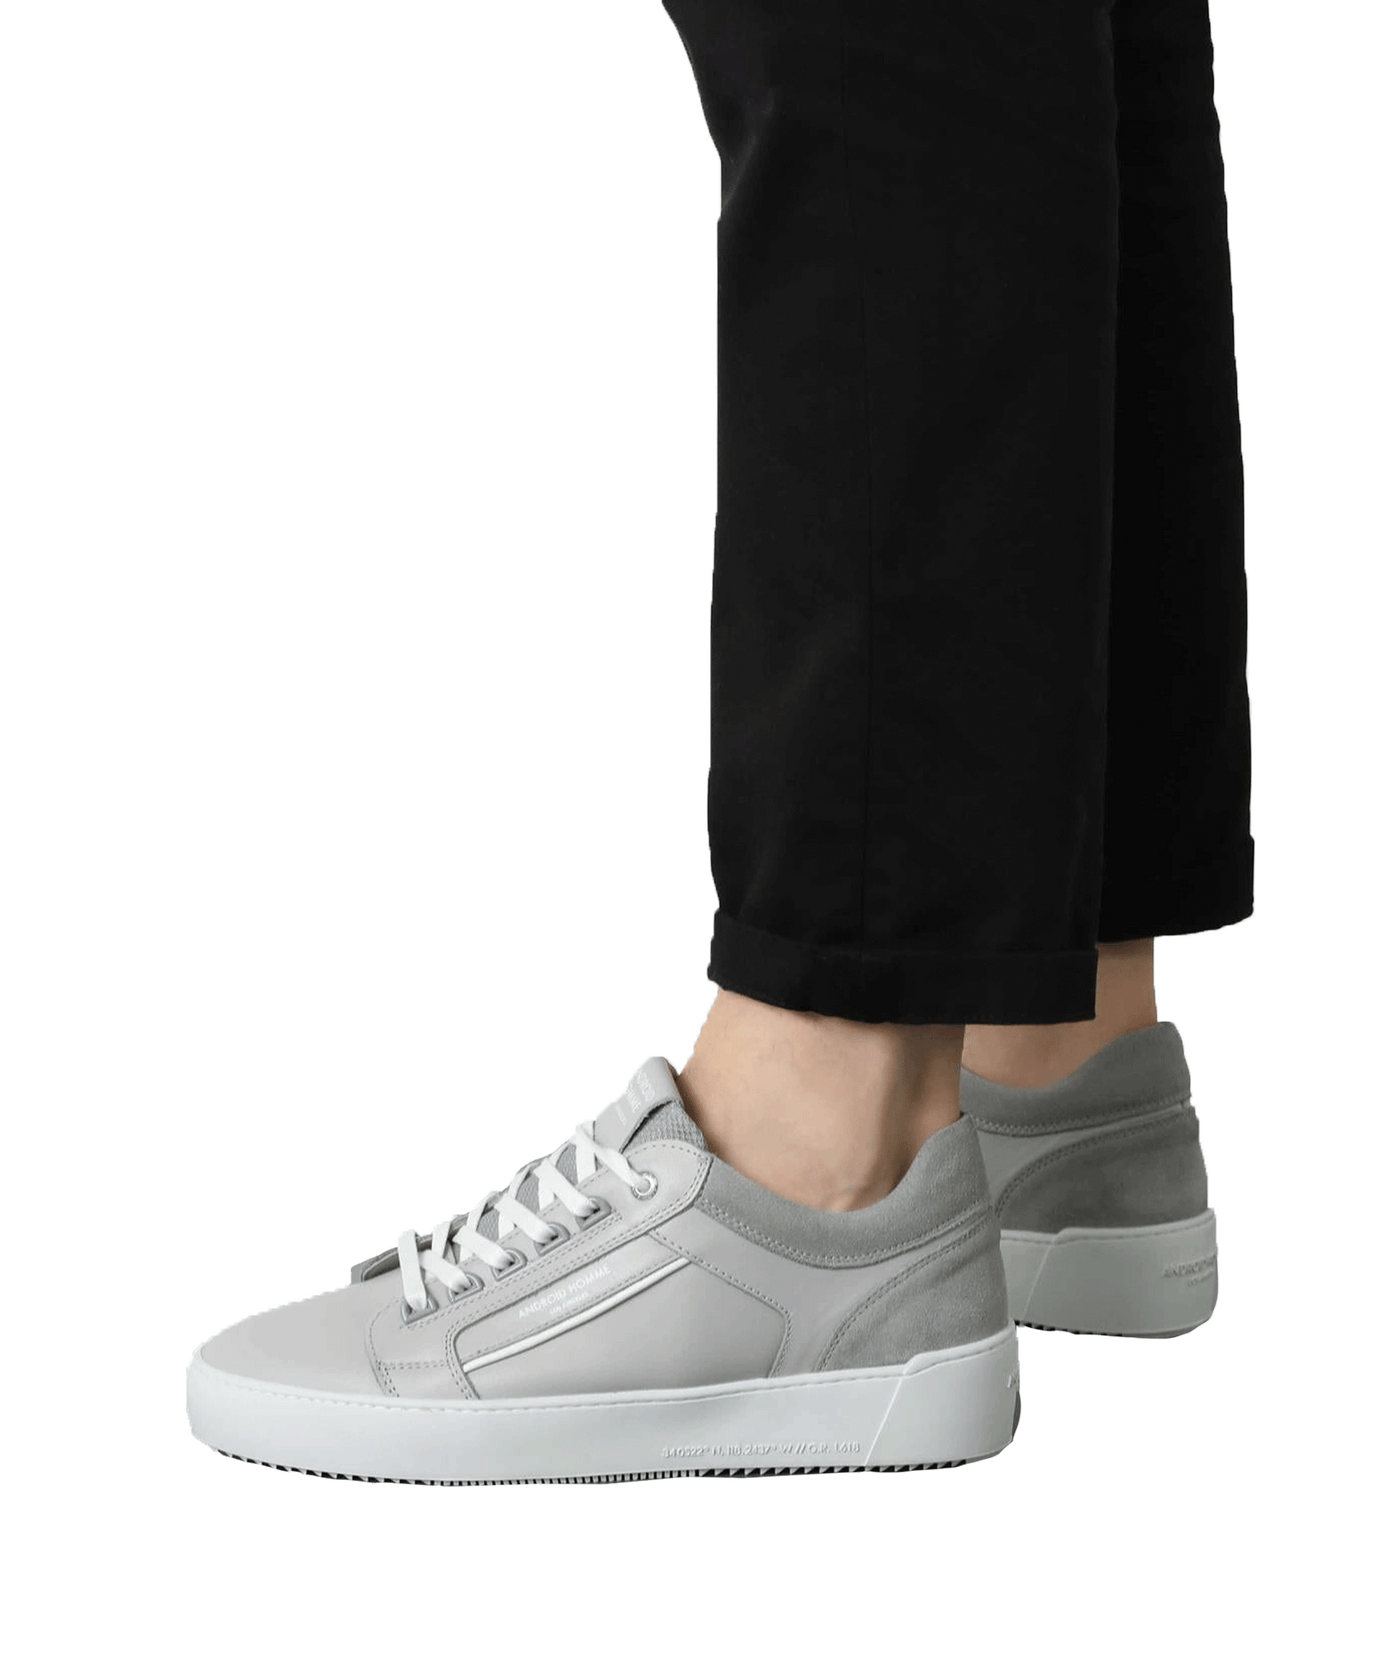 Android Homme - Ahp221-25 - Venice - Grey/white Leather 2